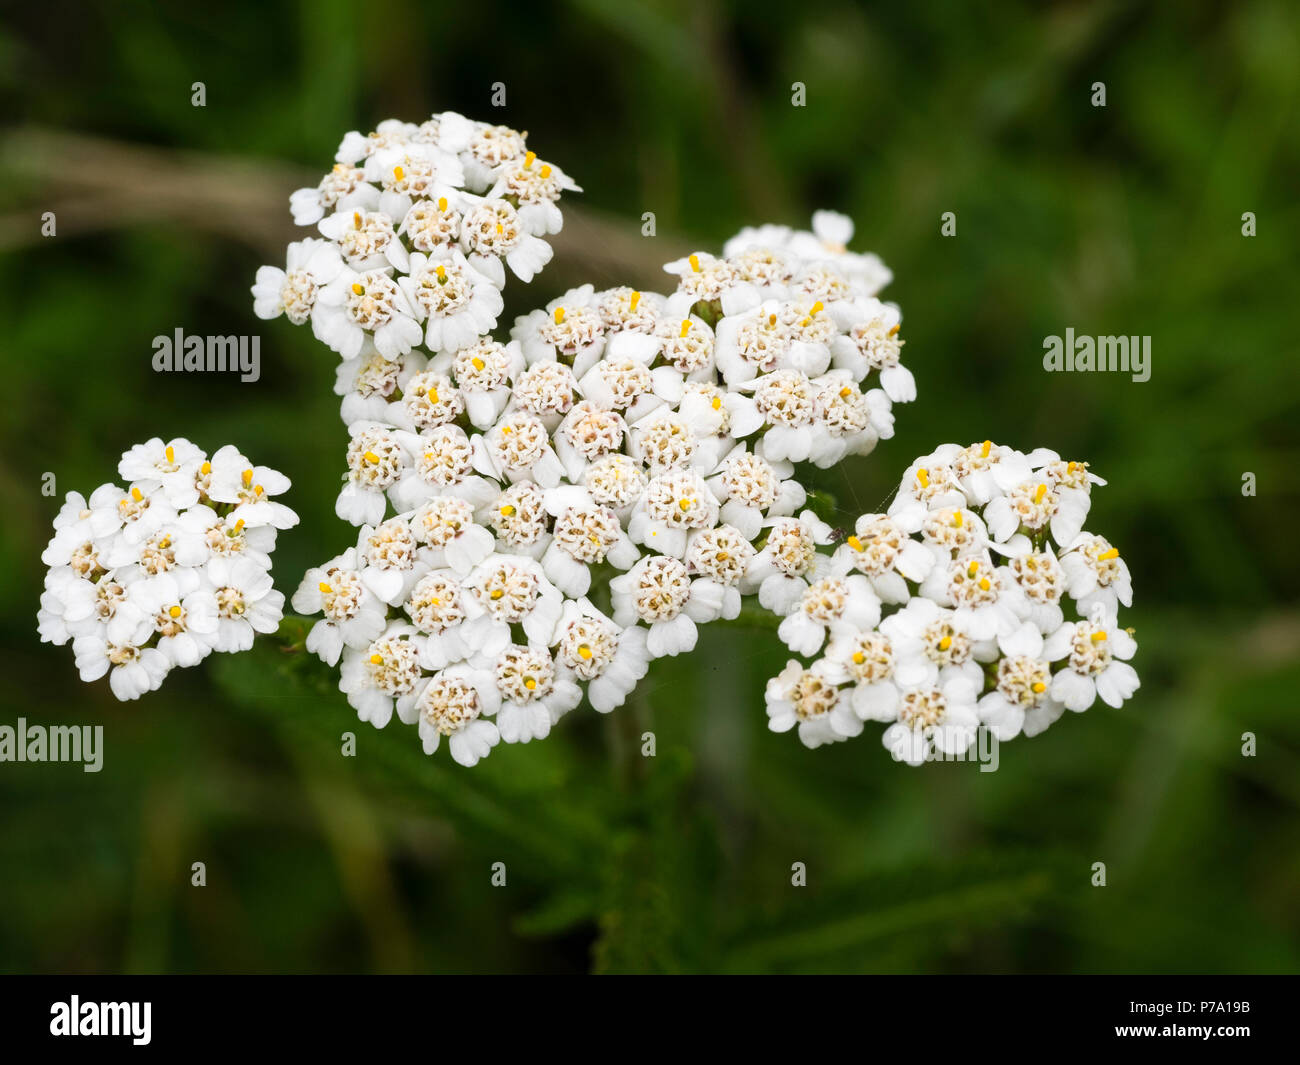 White summer flower heads of the yarrow, Achillea millefolium, a UK wildflower of meadows and roadsides Stock Photo